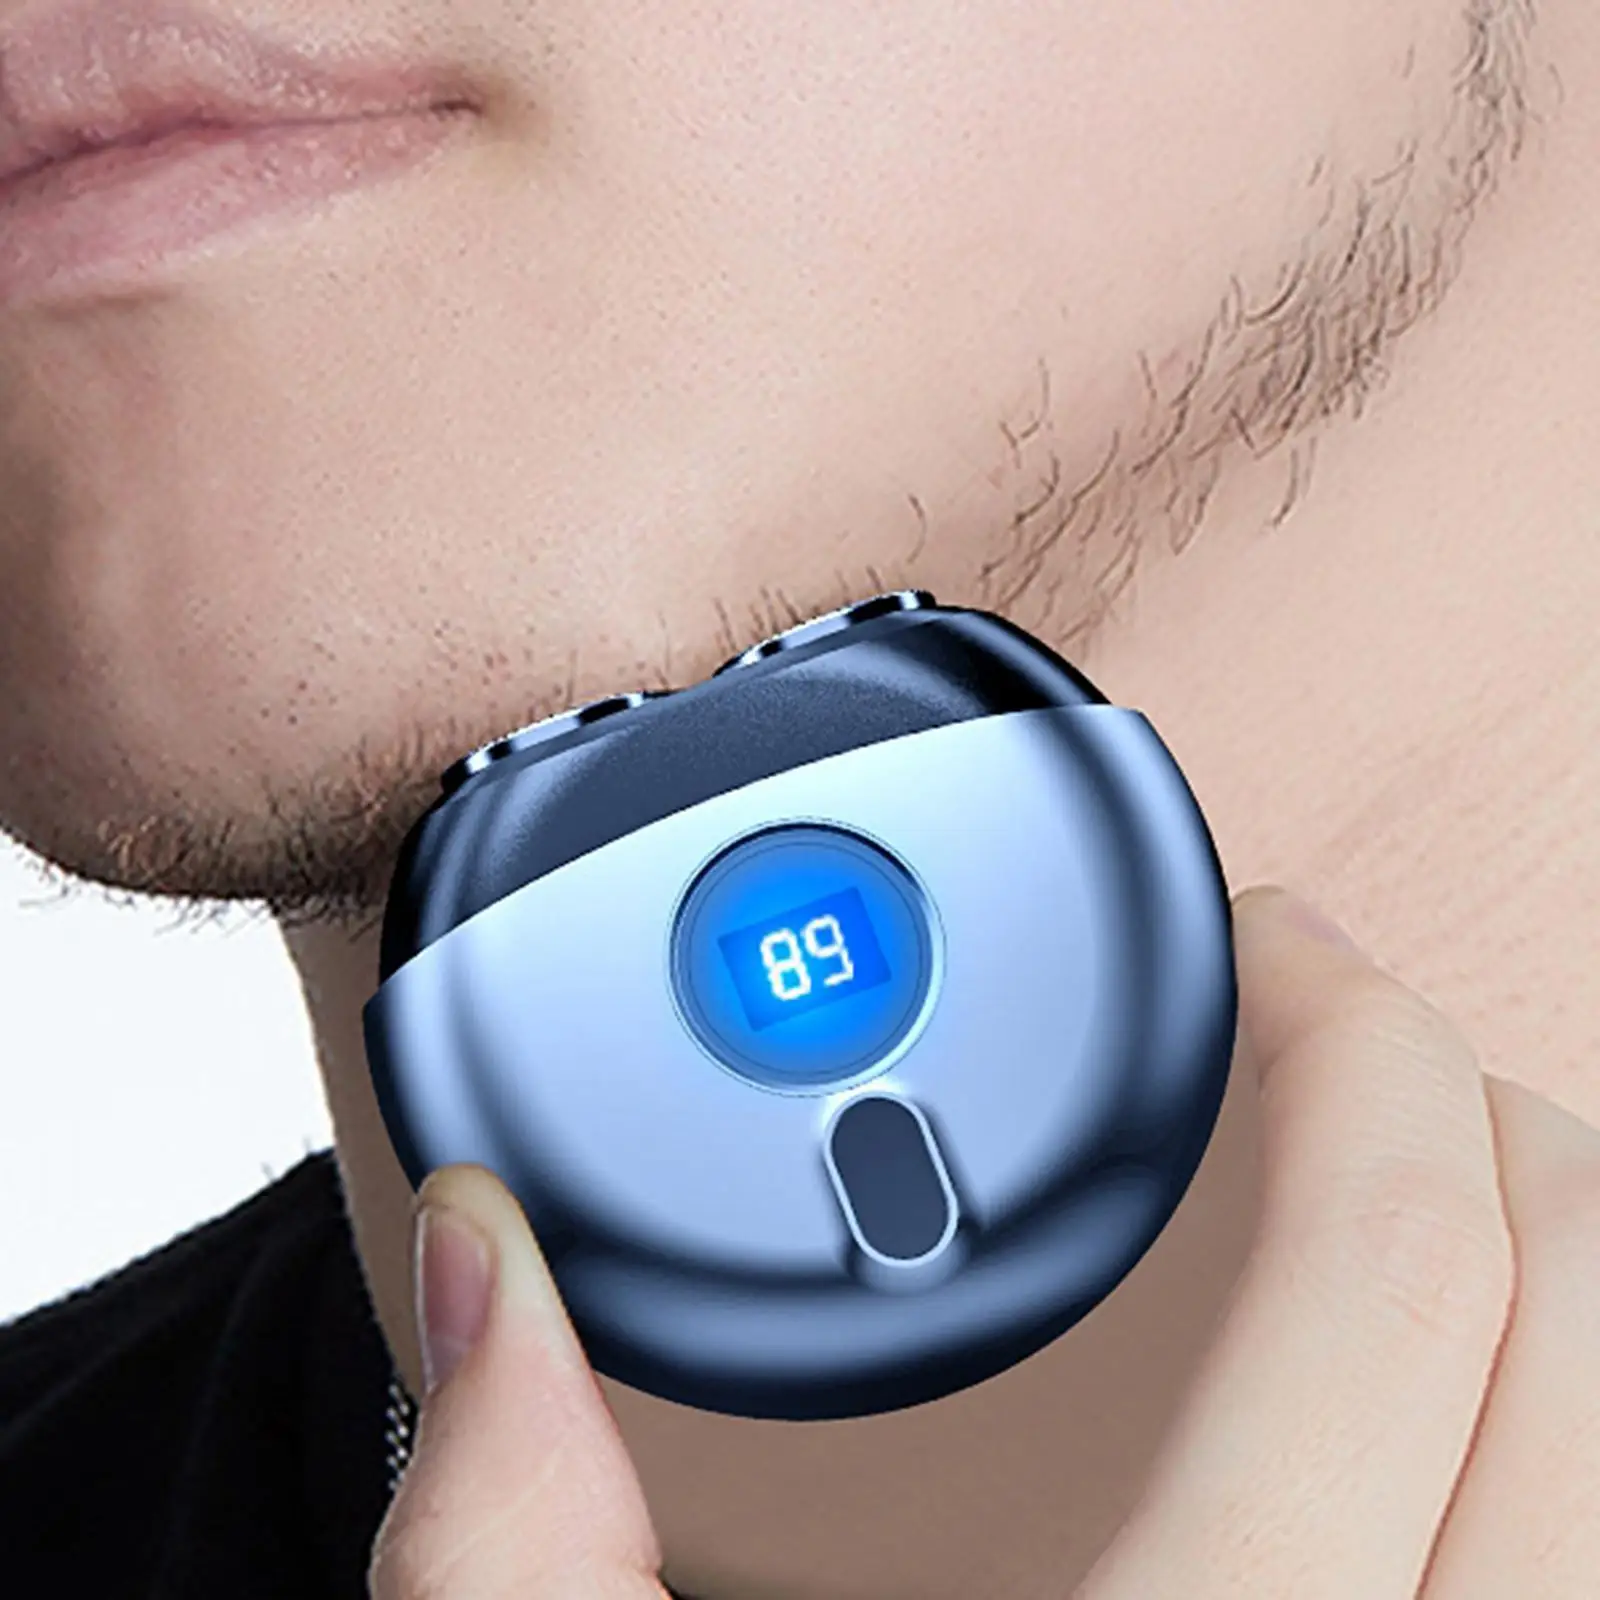 Multifunction Electric Shaver USB Charging Durable Waterproof Facial trimmers Boyfriend